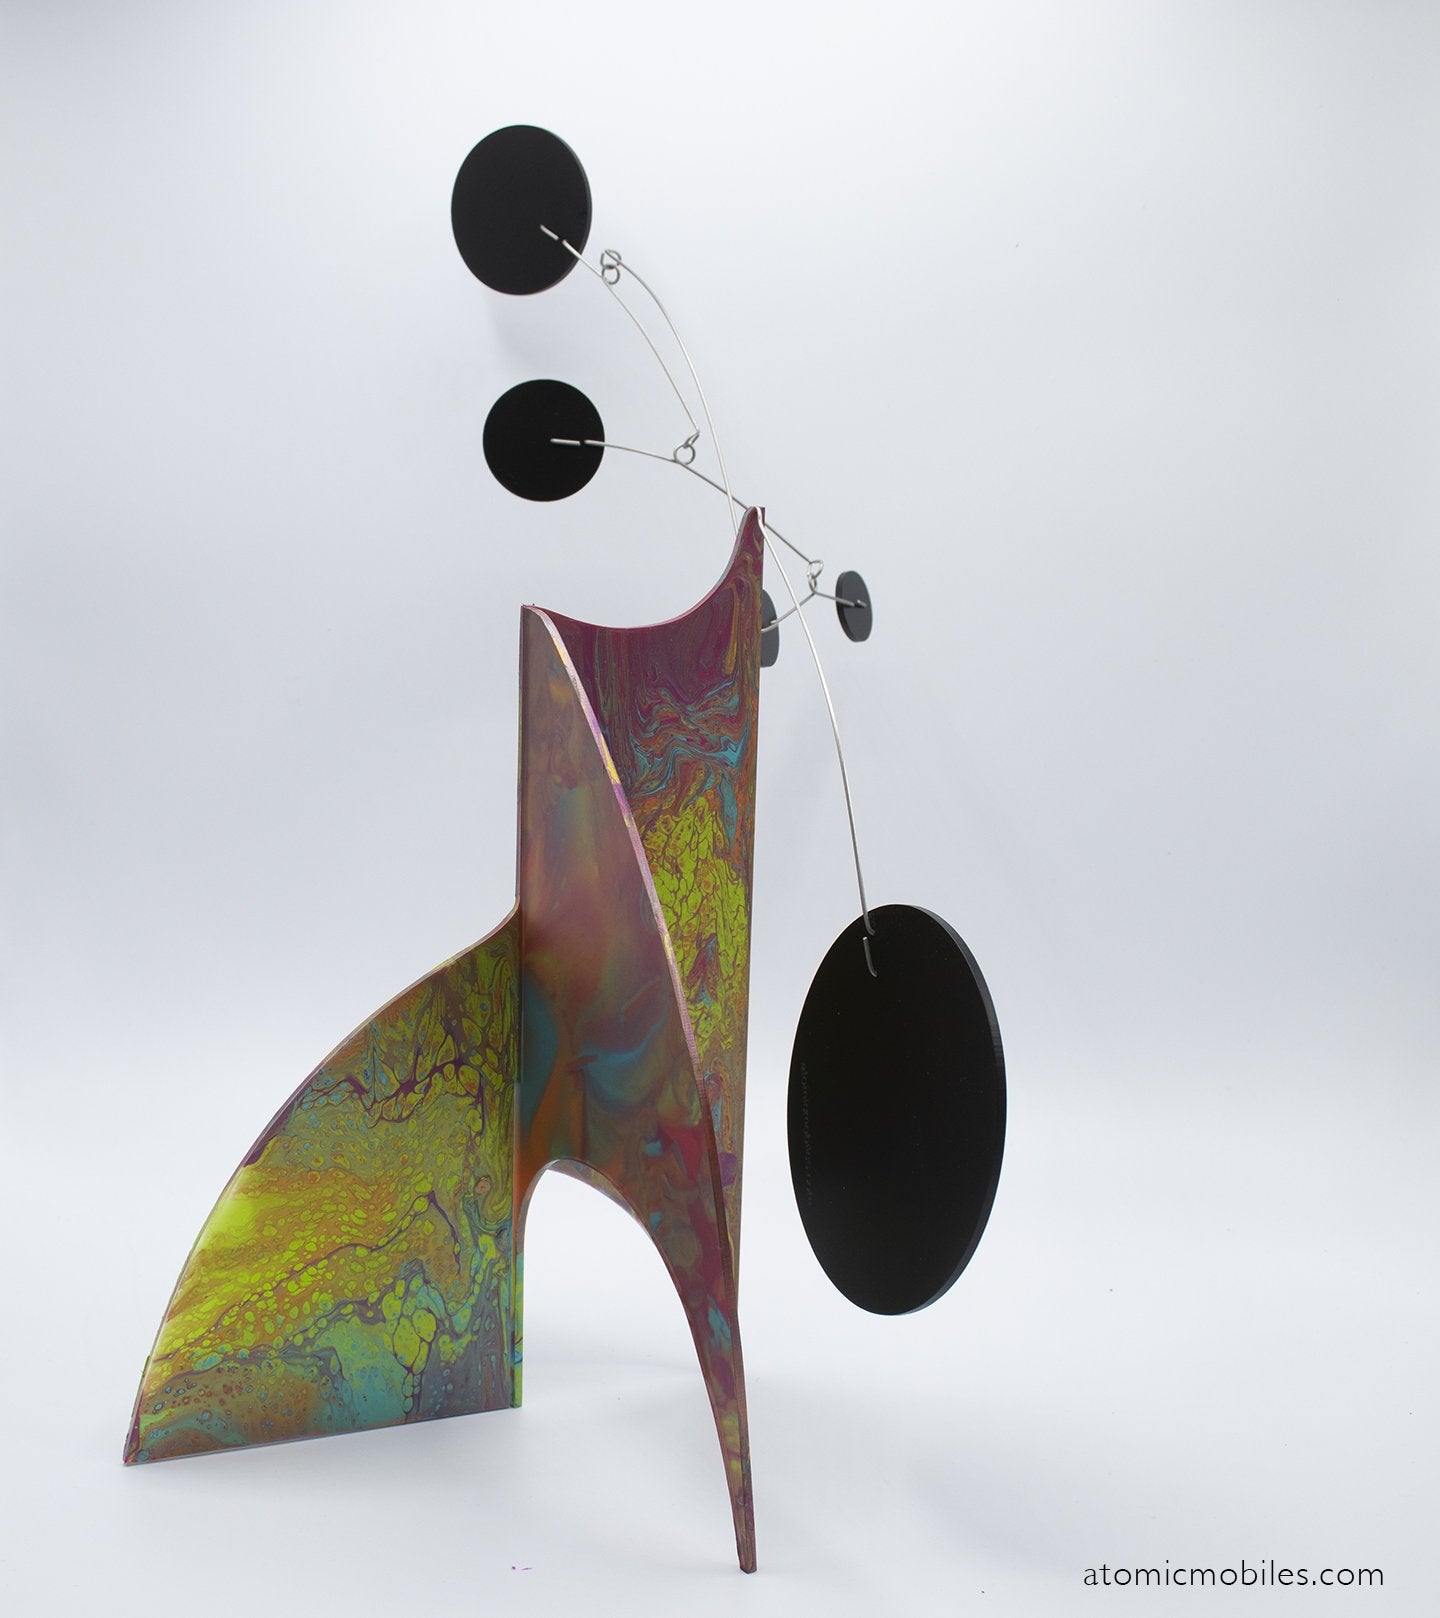 Eloquent Hand Painted Stabile Sculpture #1 - Atomic Mobiles Fine Art